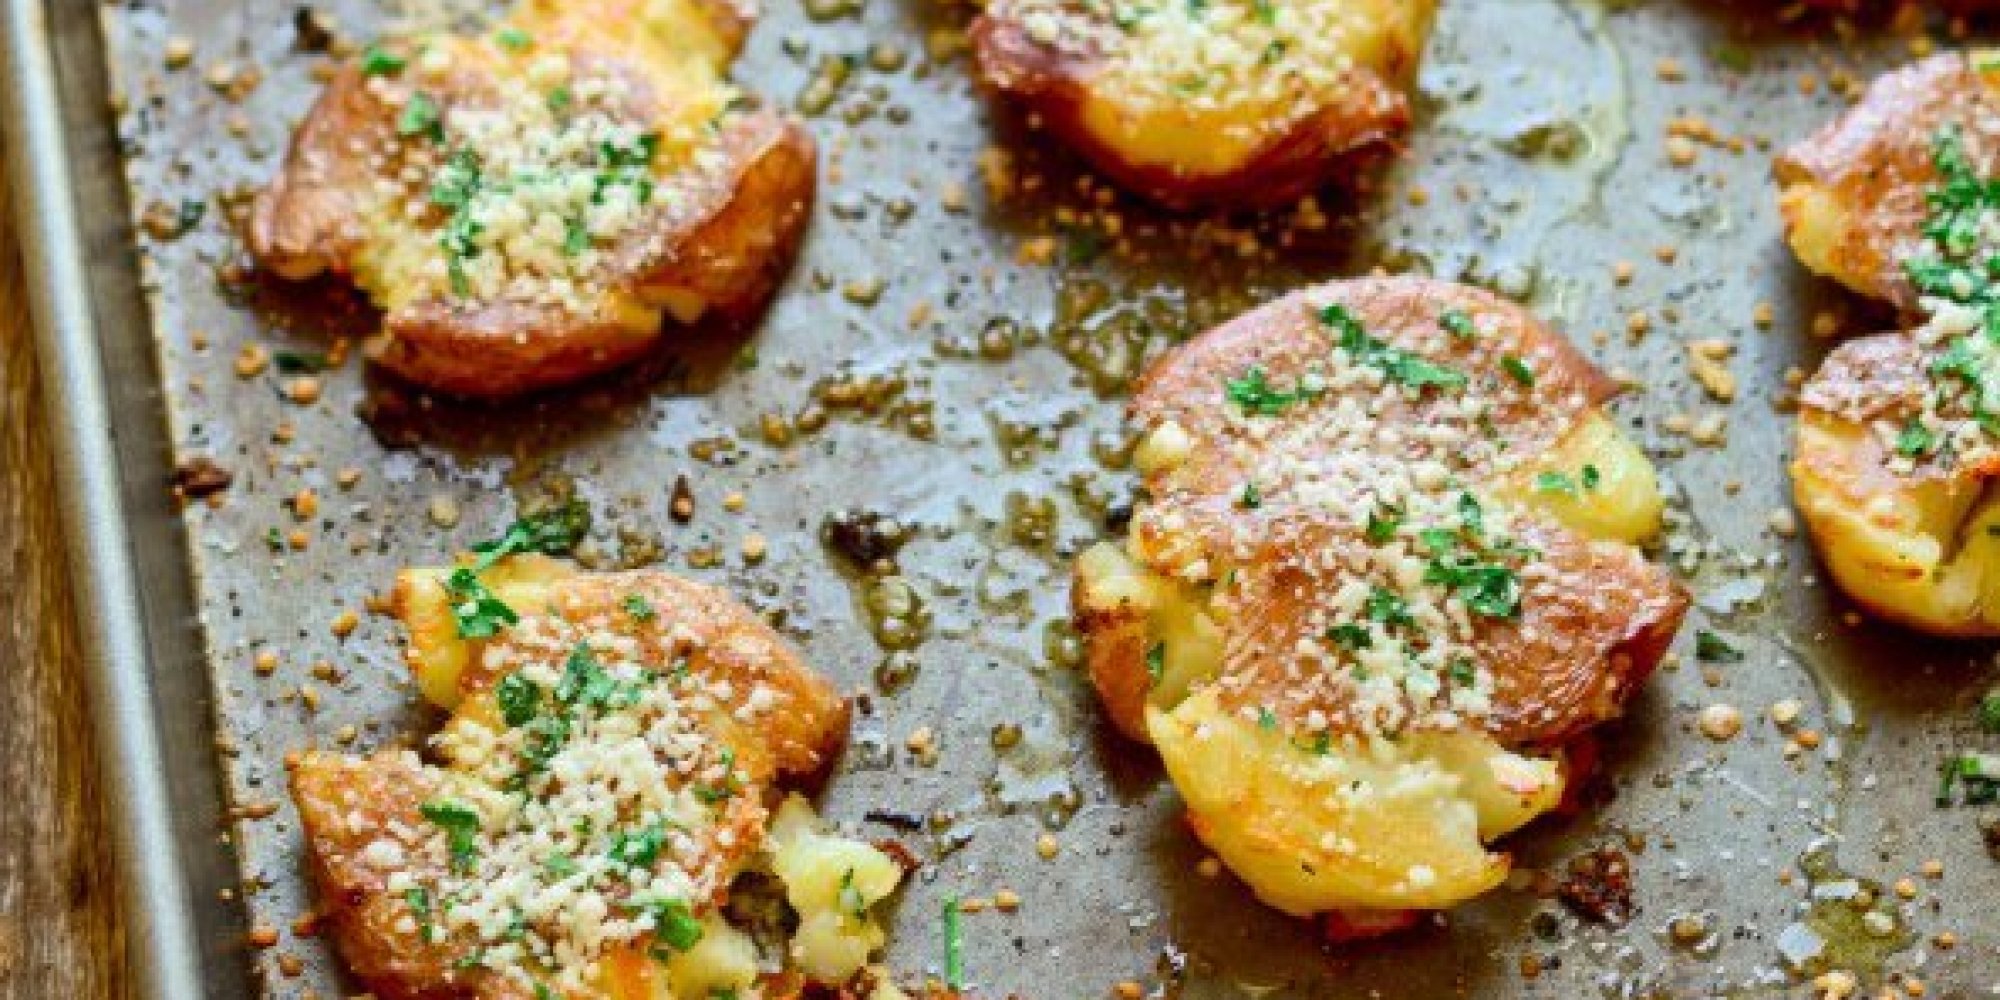 Smashed Potato Recipes Are Spuds At Their Best | HuffPost